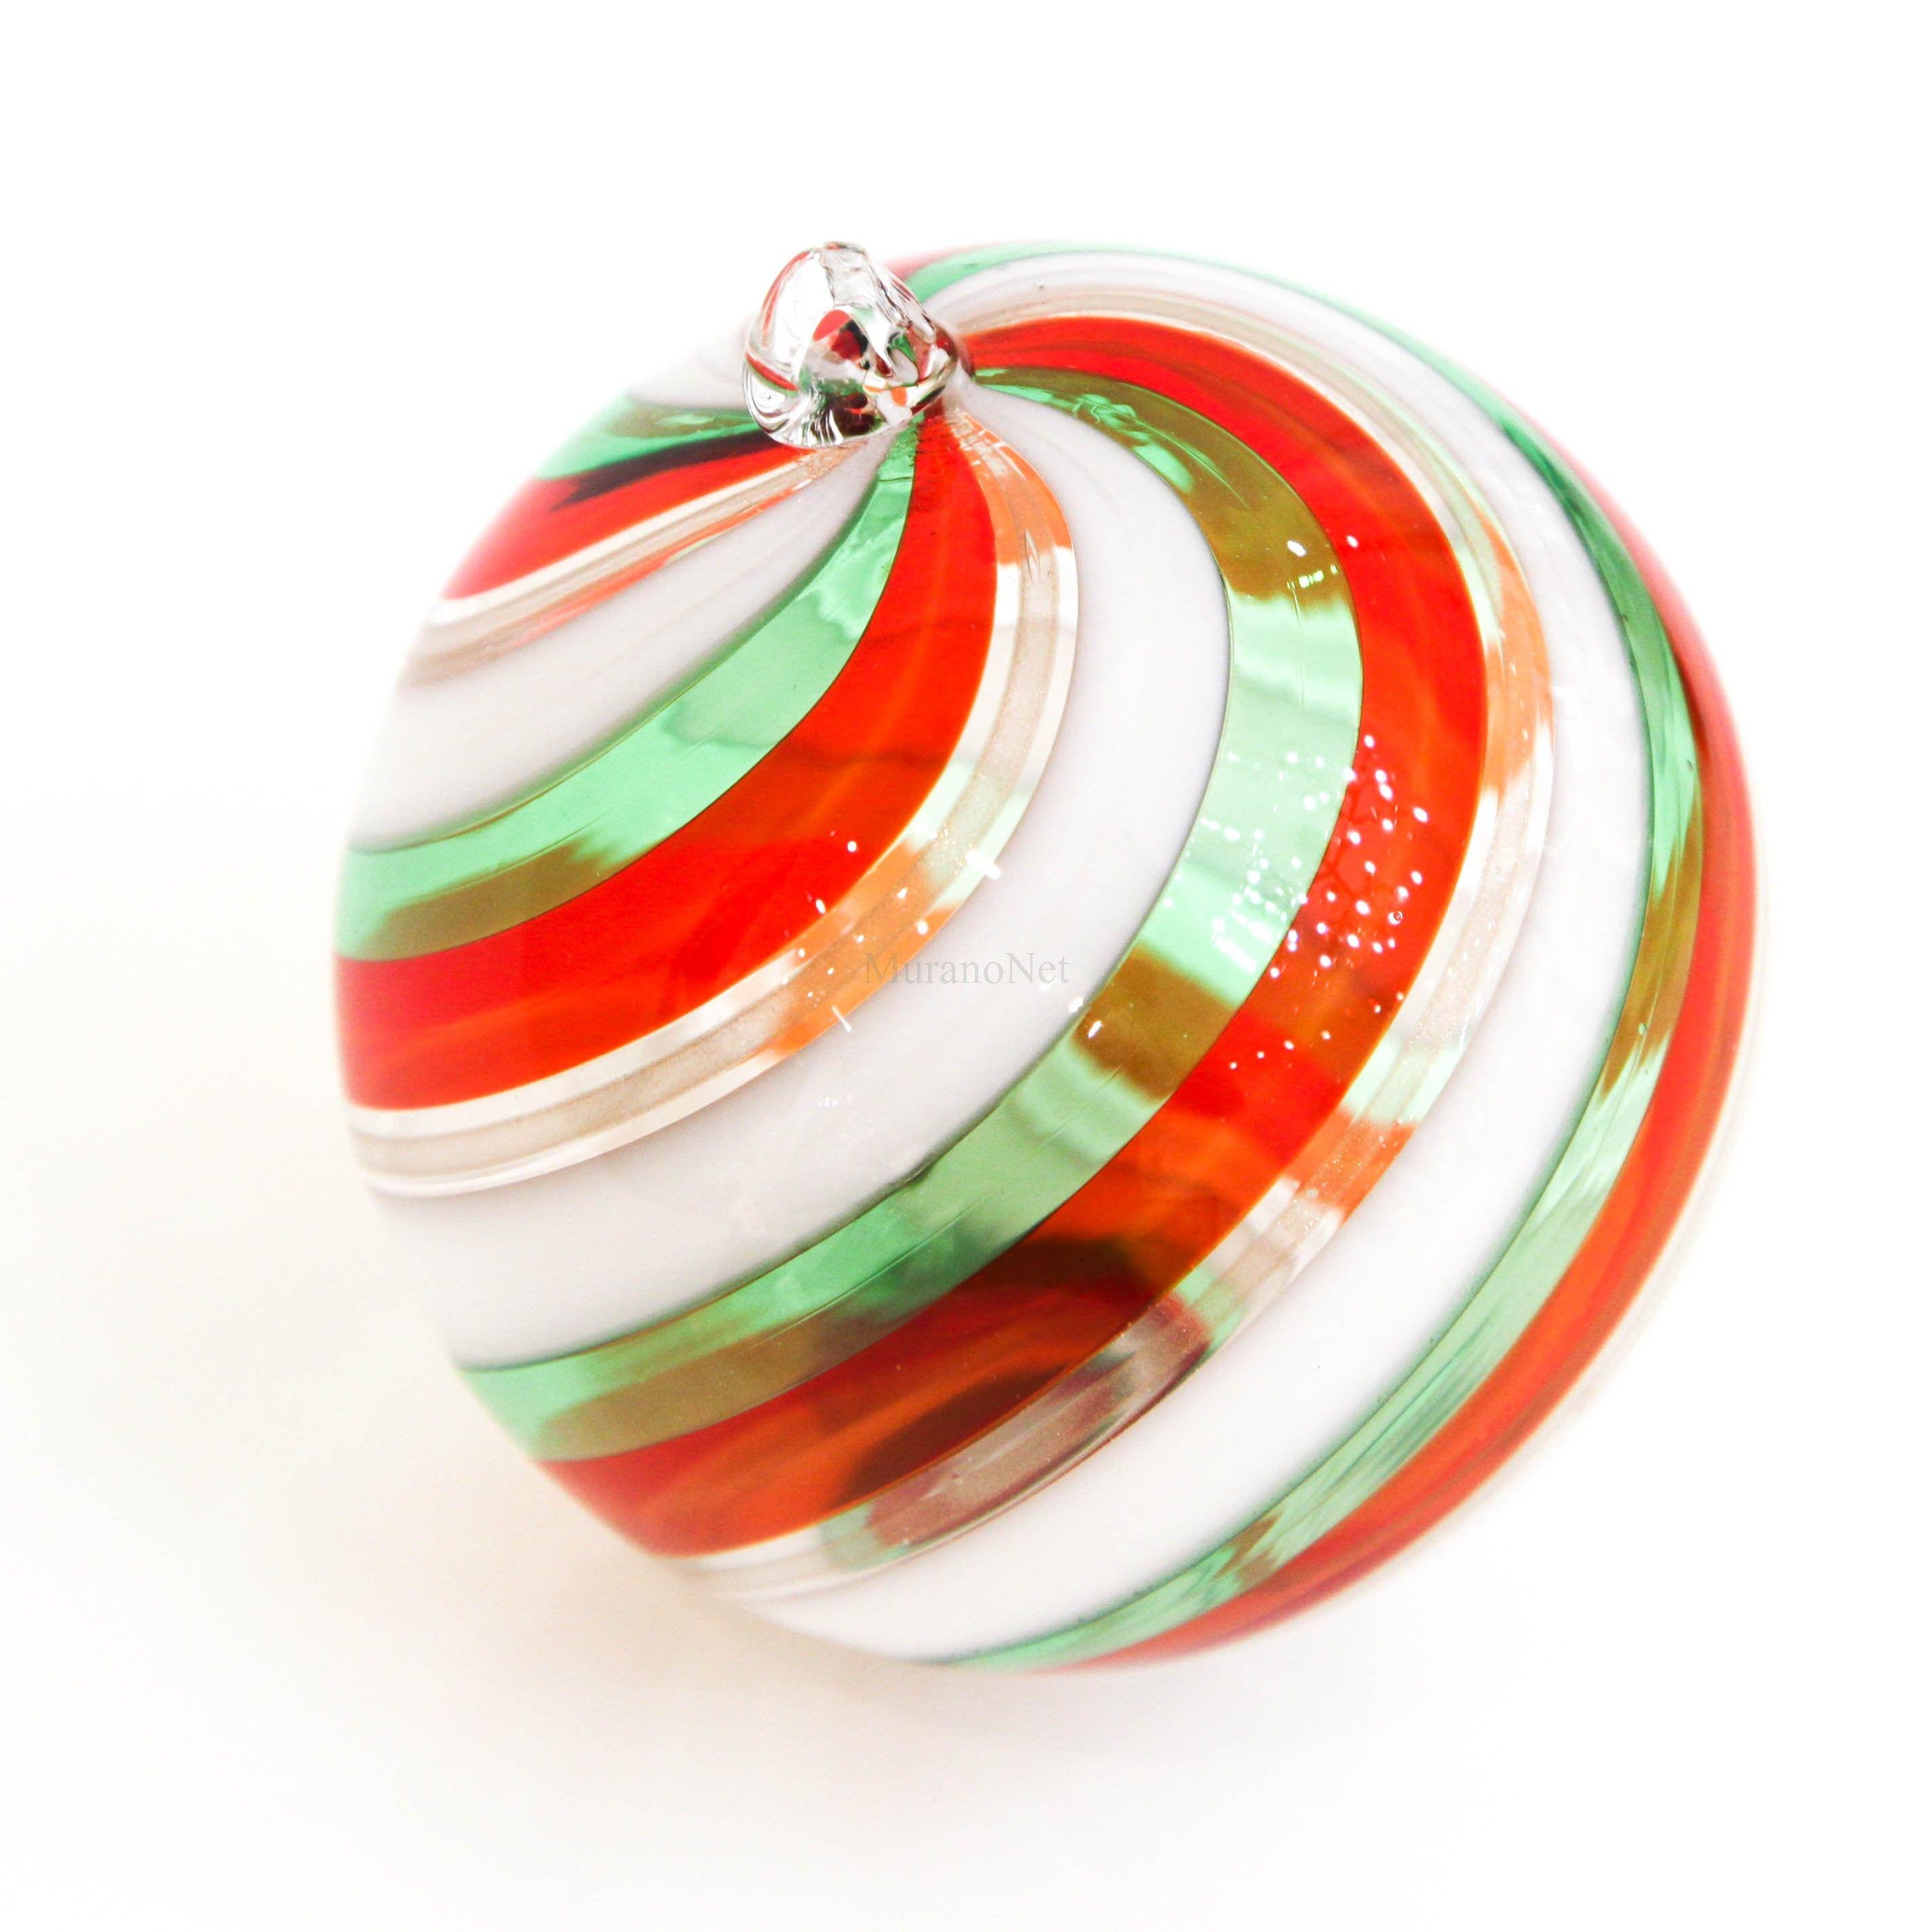 Red-Orange and Green Lines Logo - Christmas bauble and Green Lines in Murano Glass. MuranoNet